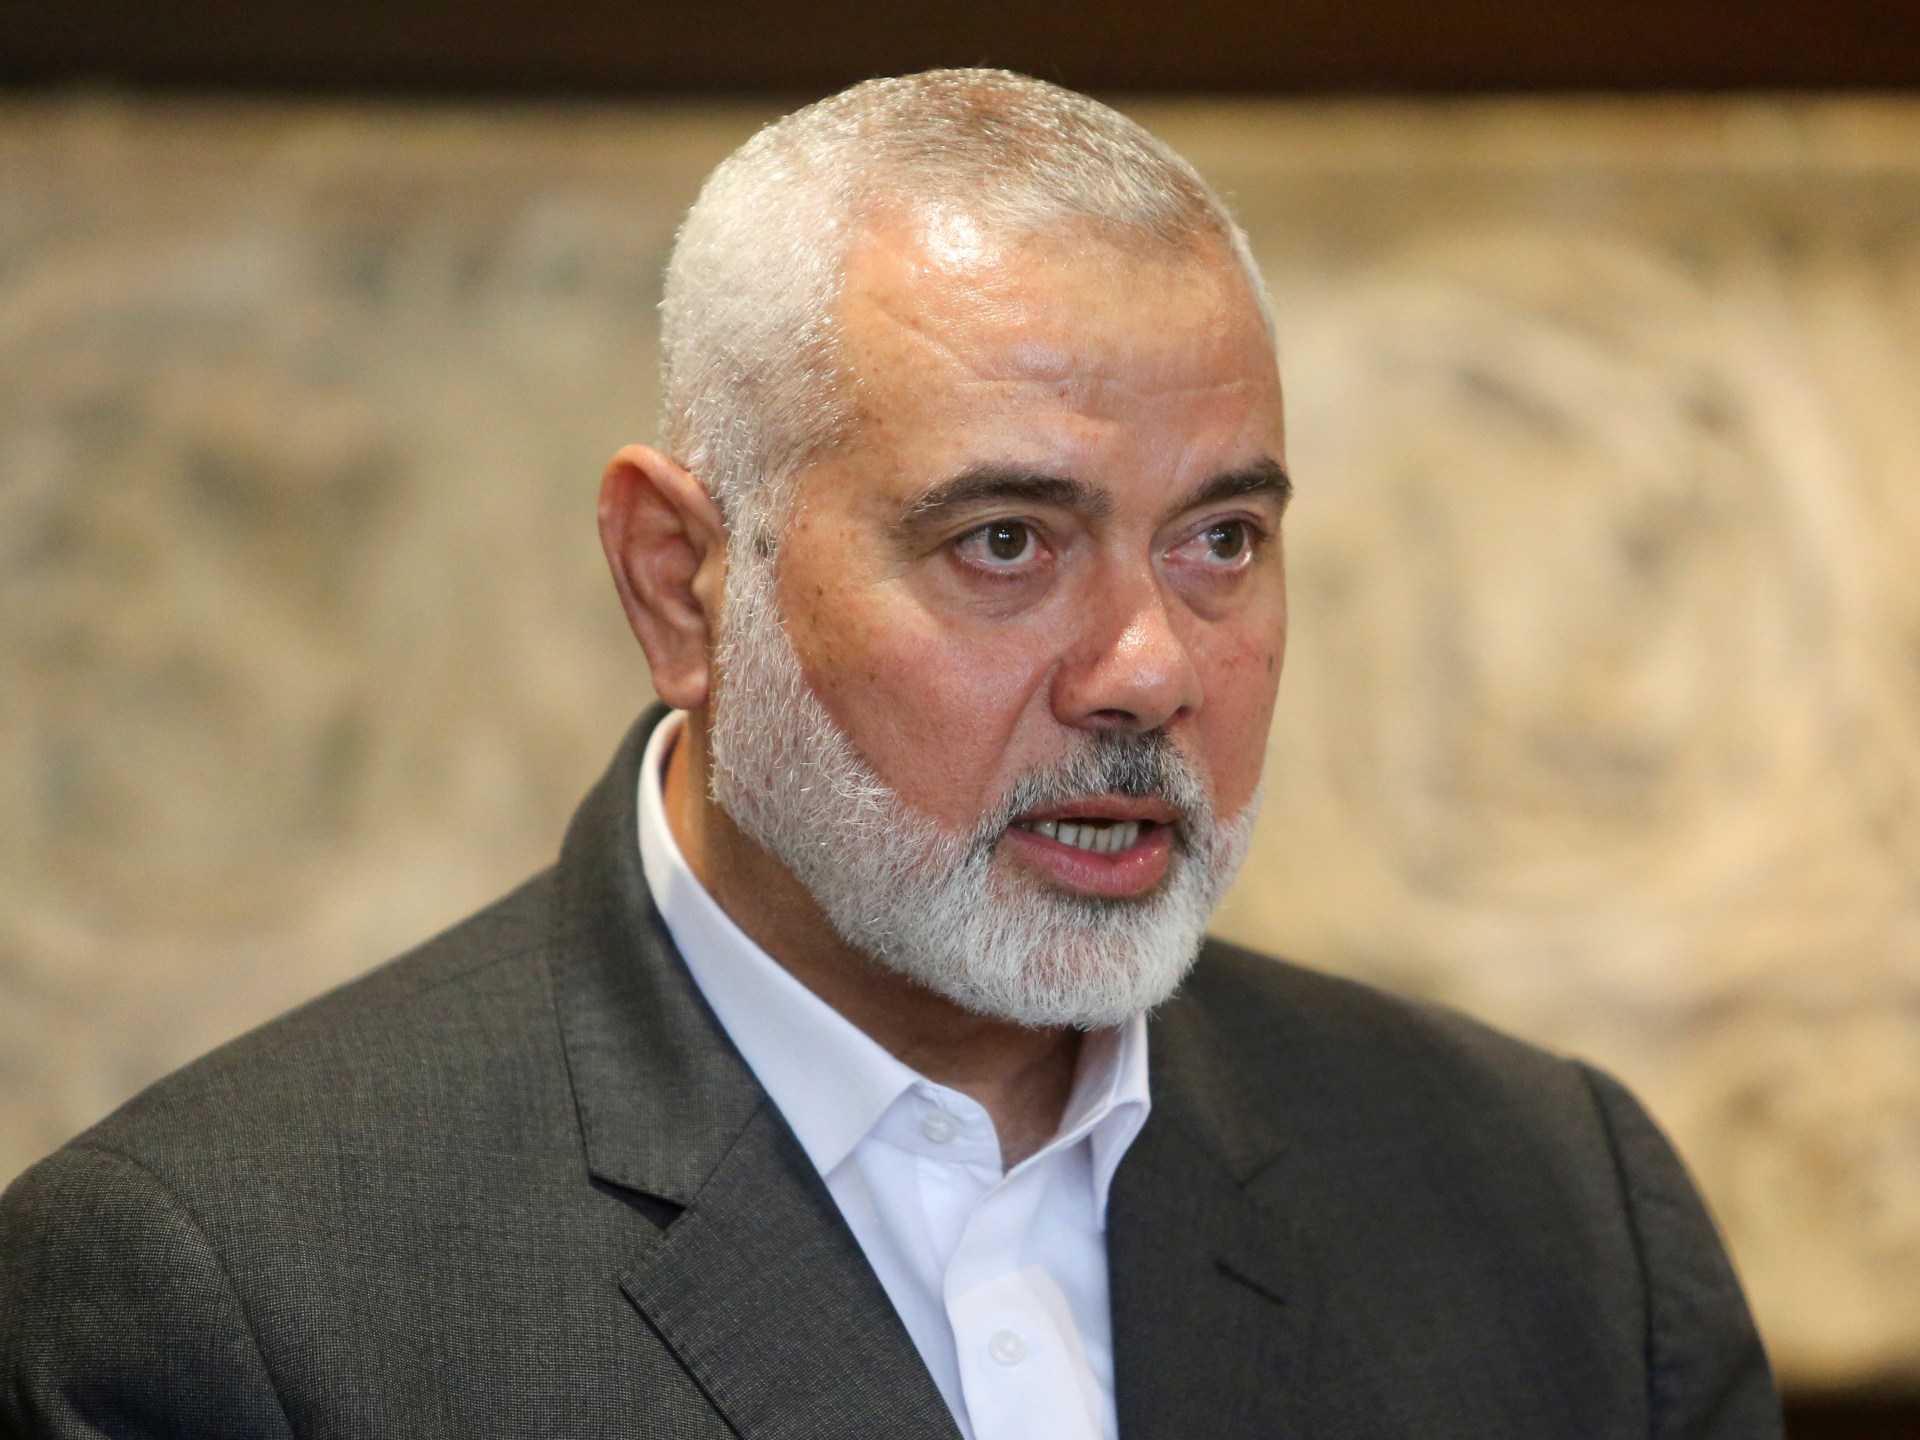 Gaza ‘approaching a truce agreement’ with Israel, says Hamas leader Haniyeh | Israel-Palestine conflict News